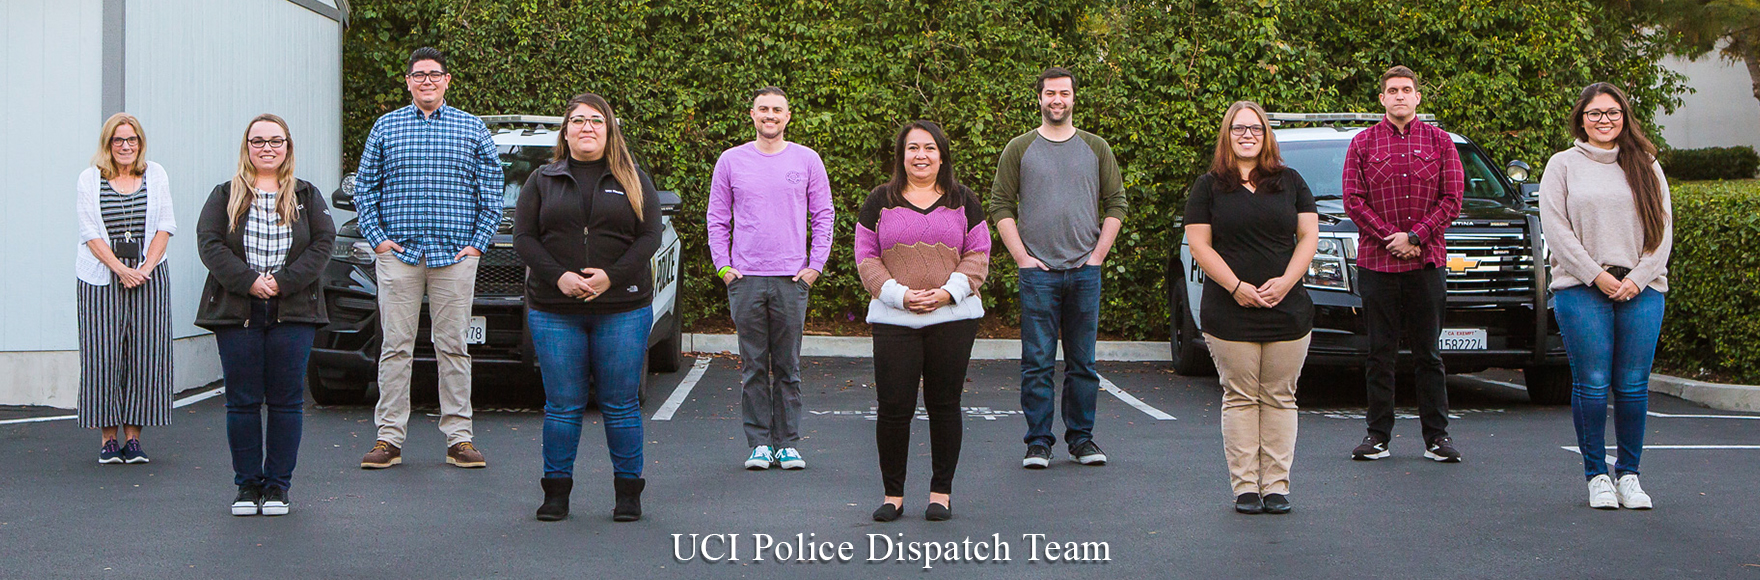 A photo of our smiling dispatch team